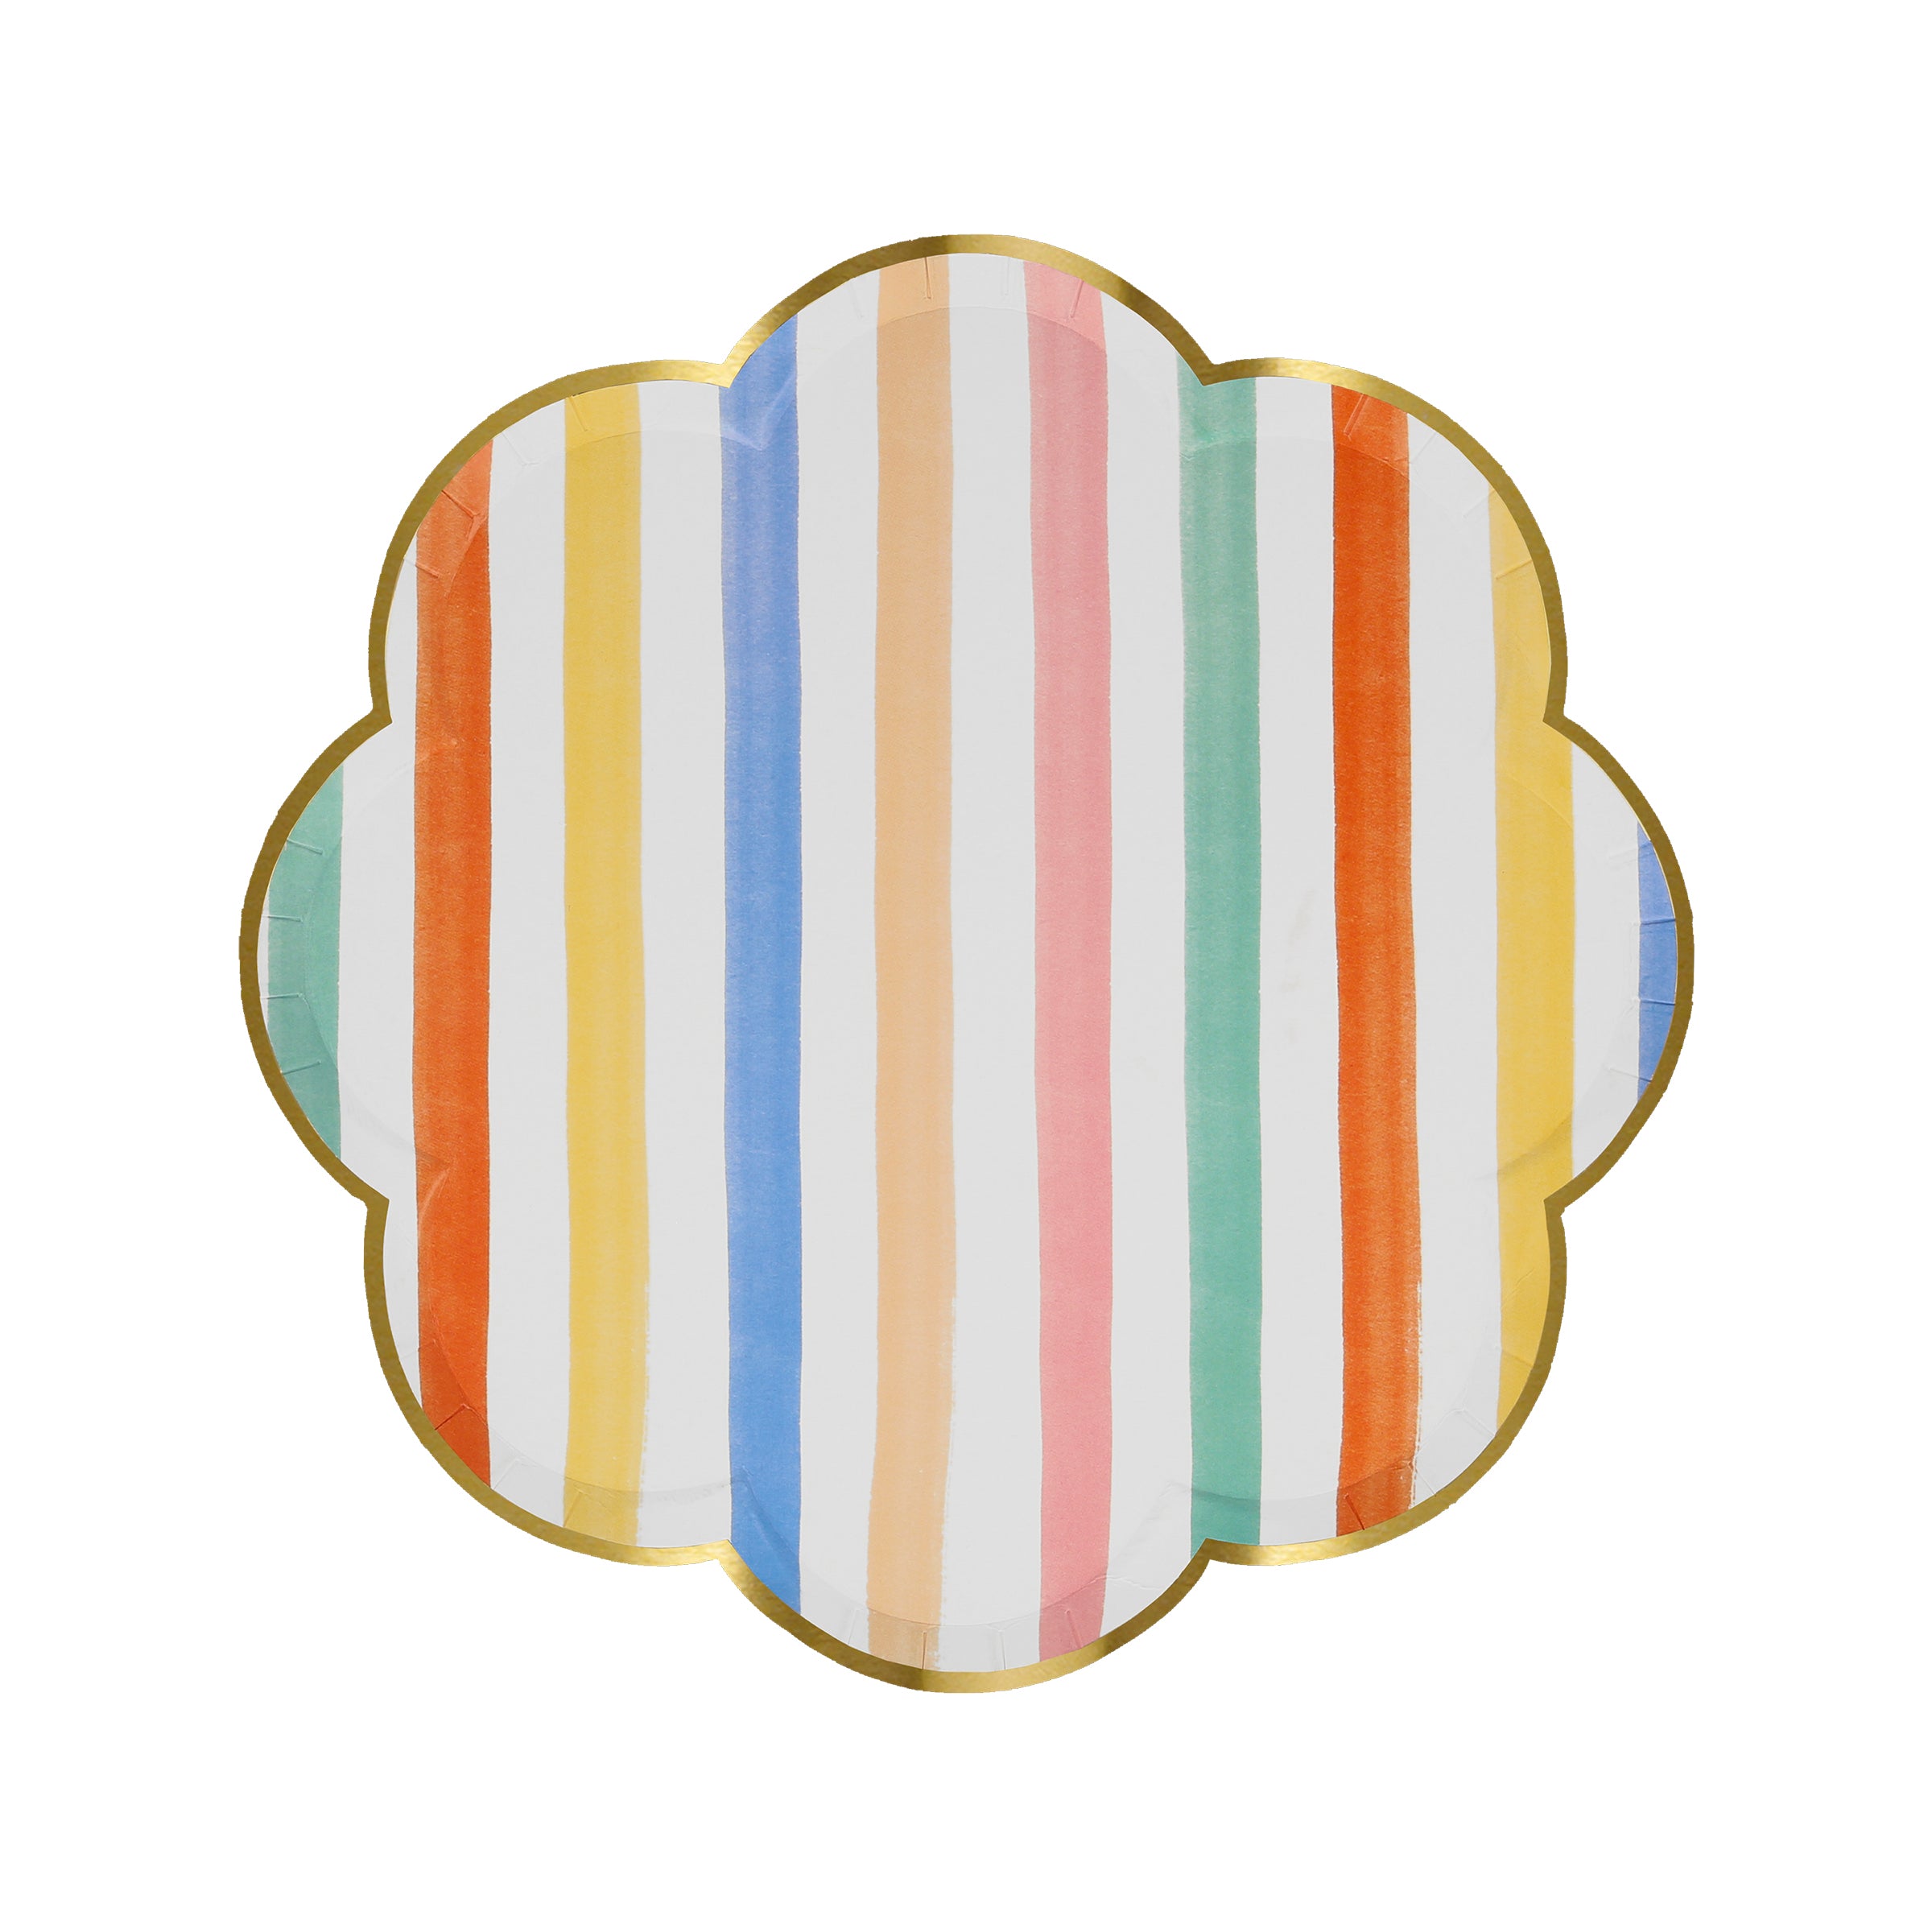 Our decorative plates include spotty plates, checked plates and striped plates in bright colors.